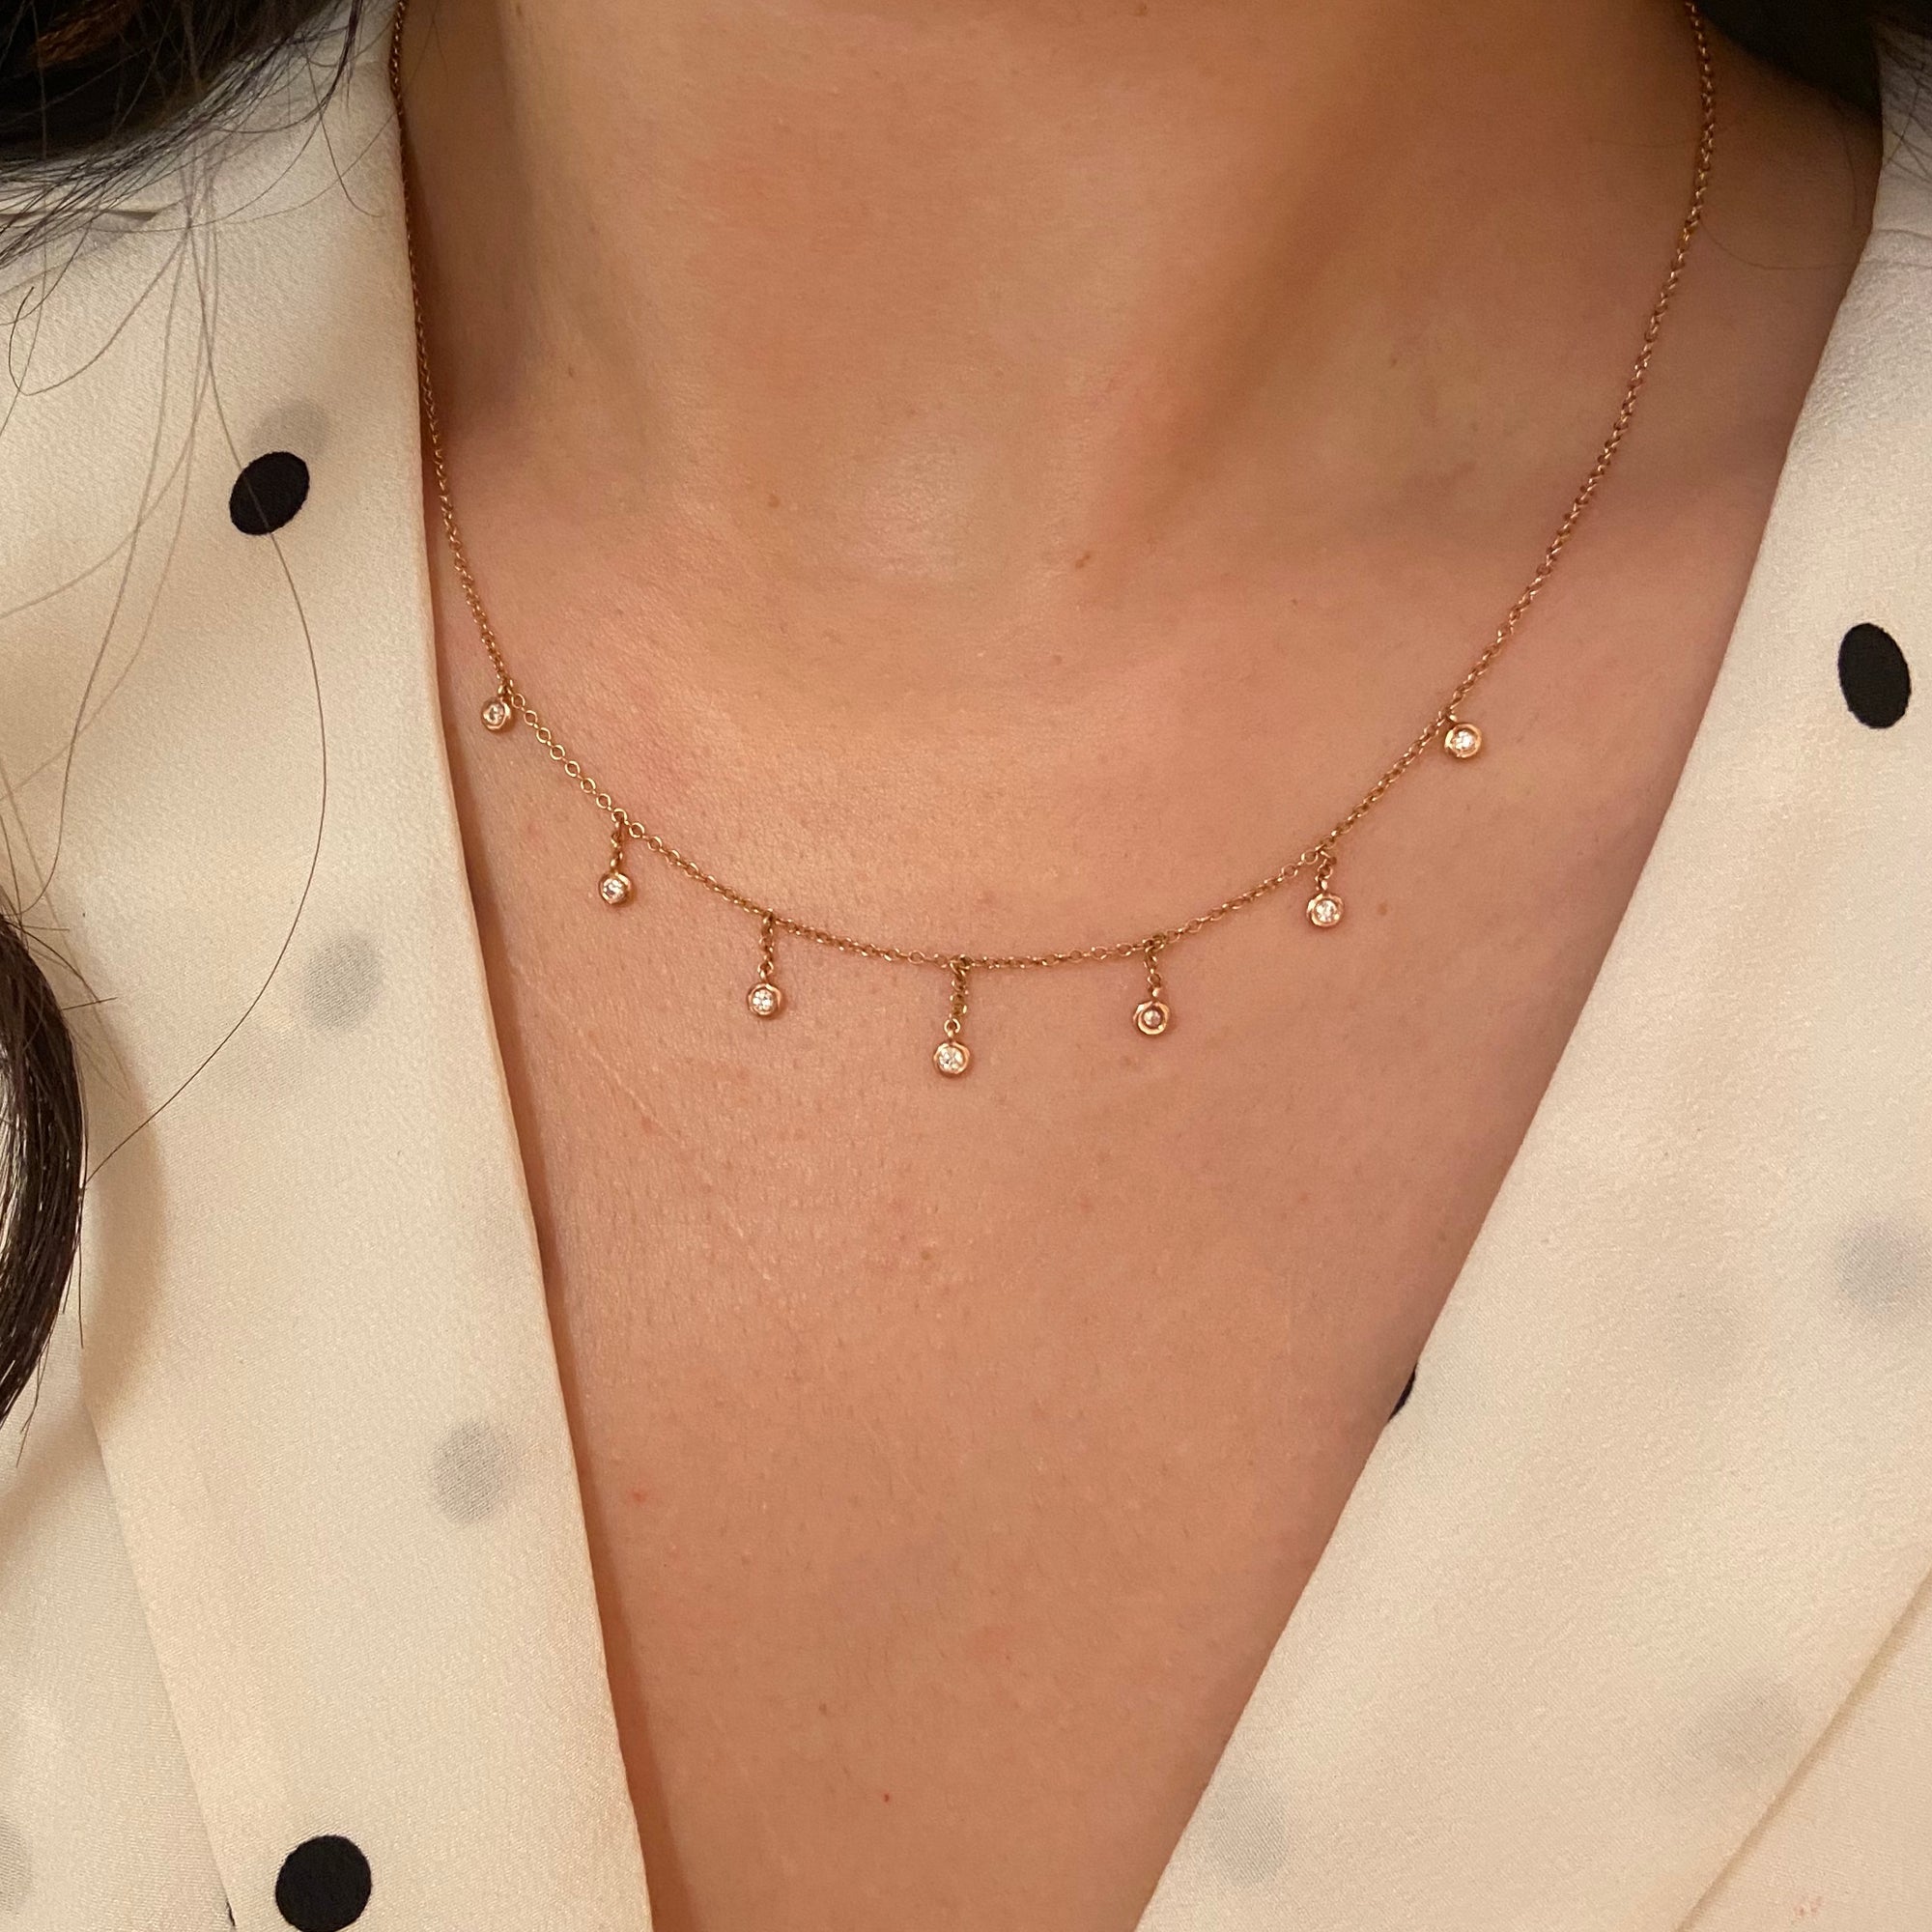 Raindrop Choker Necklace With Diamonds in 14k Rose Gold